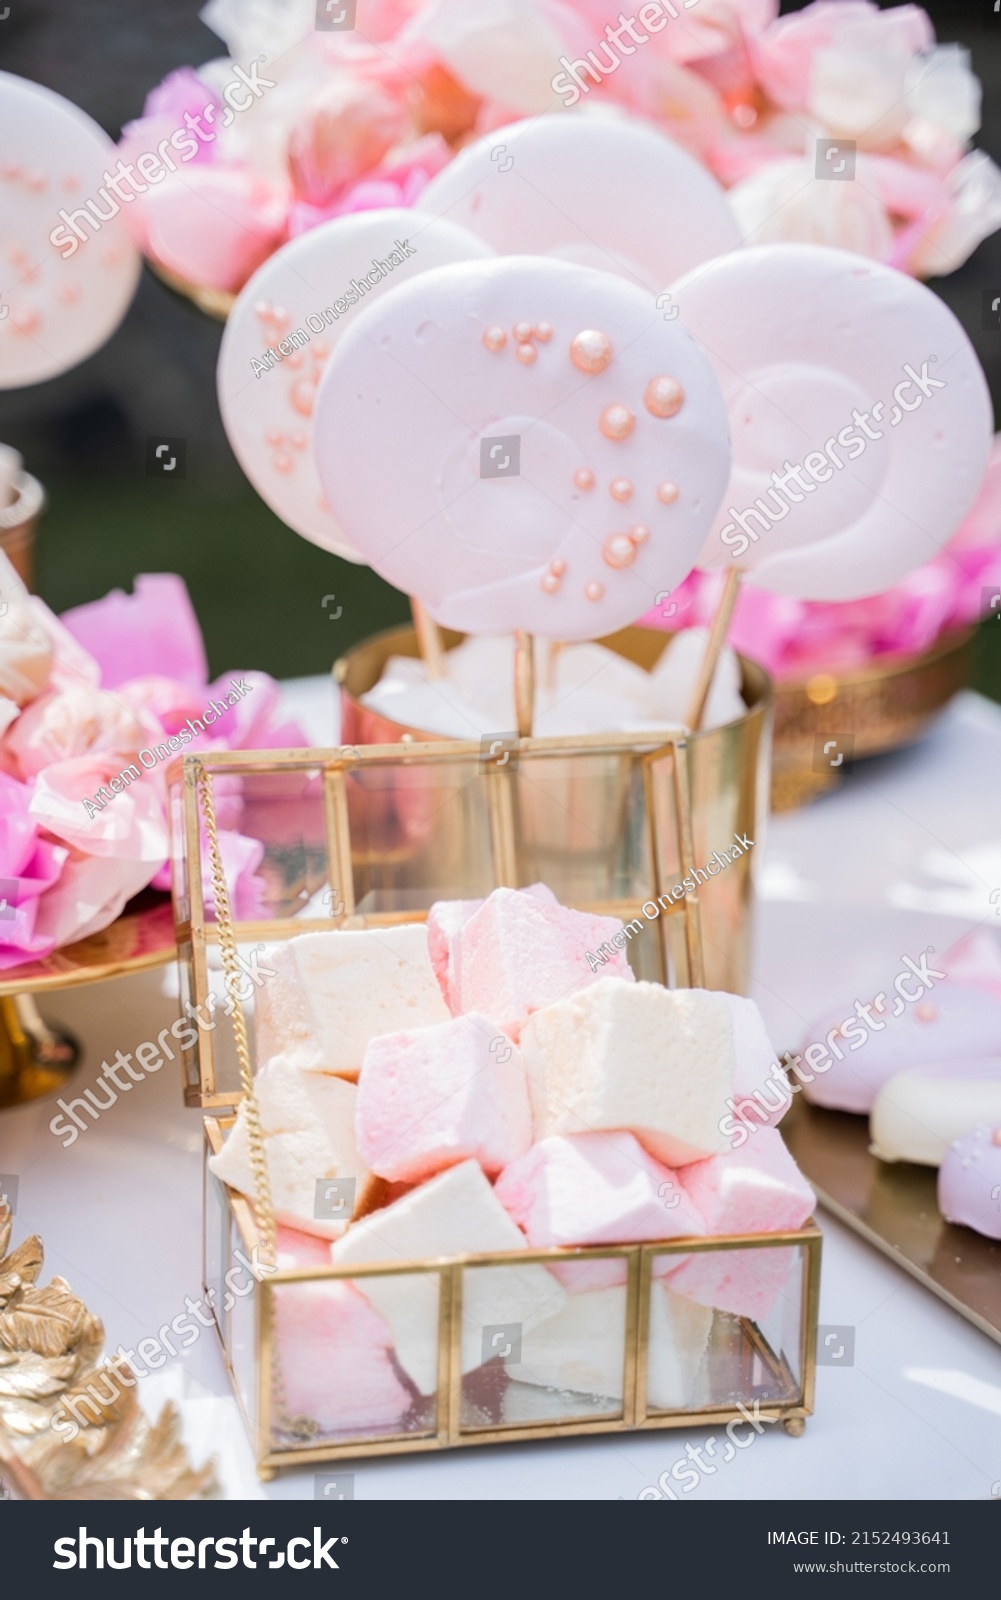 Platter of cake pops with pink icing, closeup. Candy bar and catering concept for birthday, wedding and other holiday celebration #2152493641